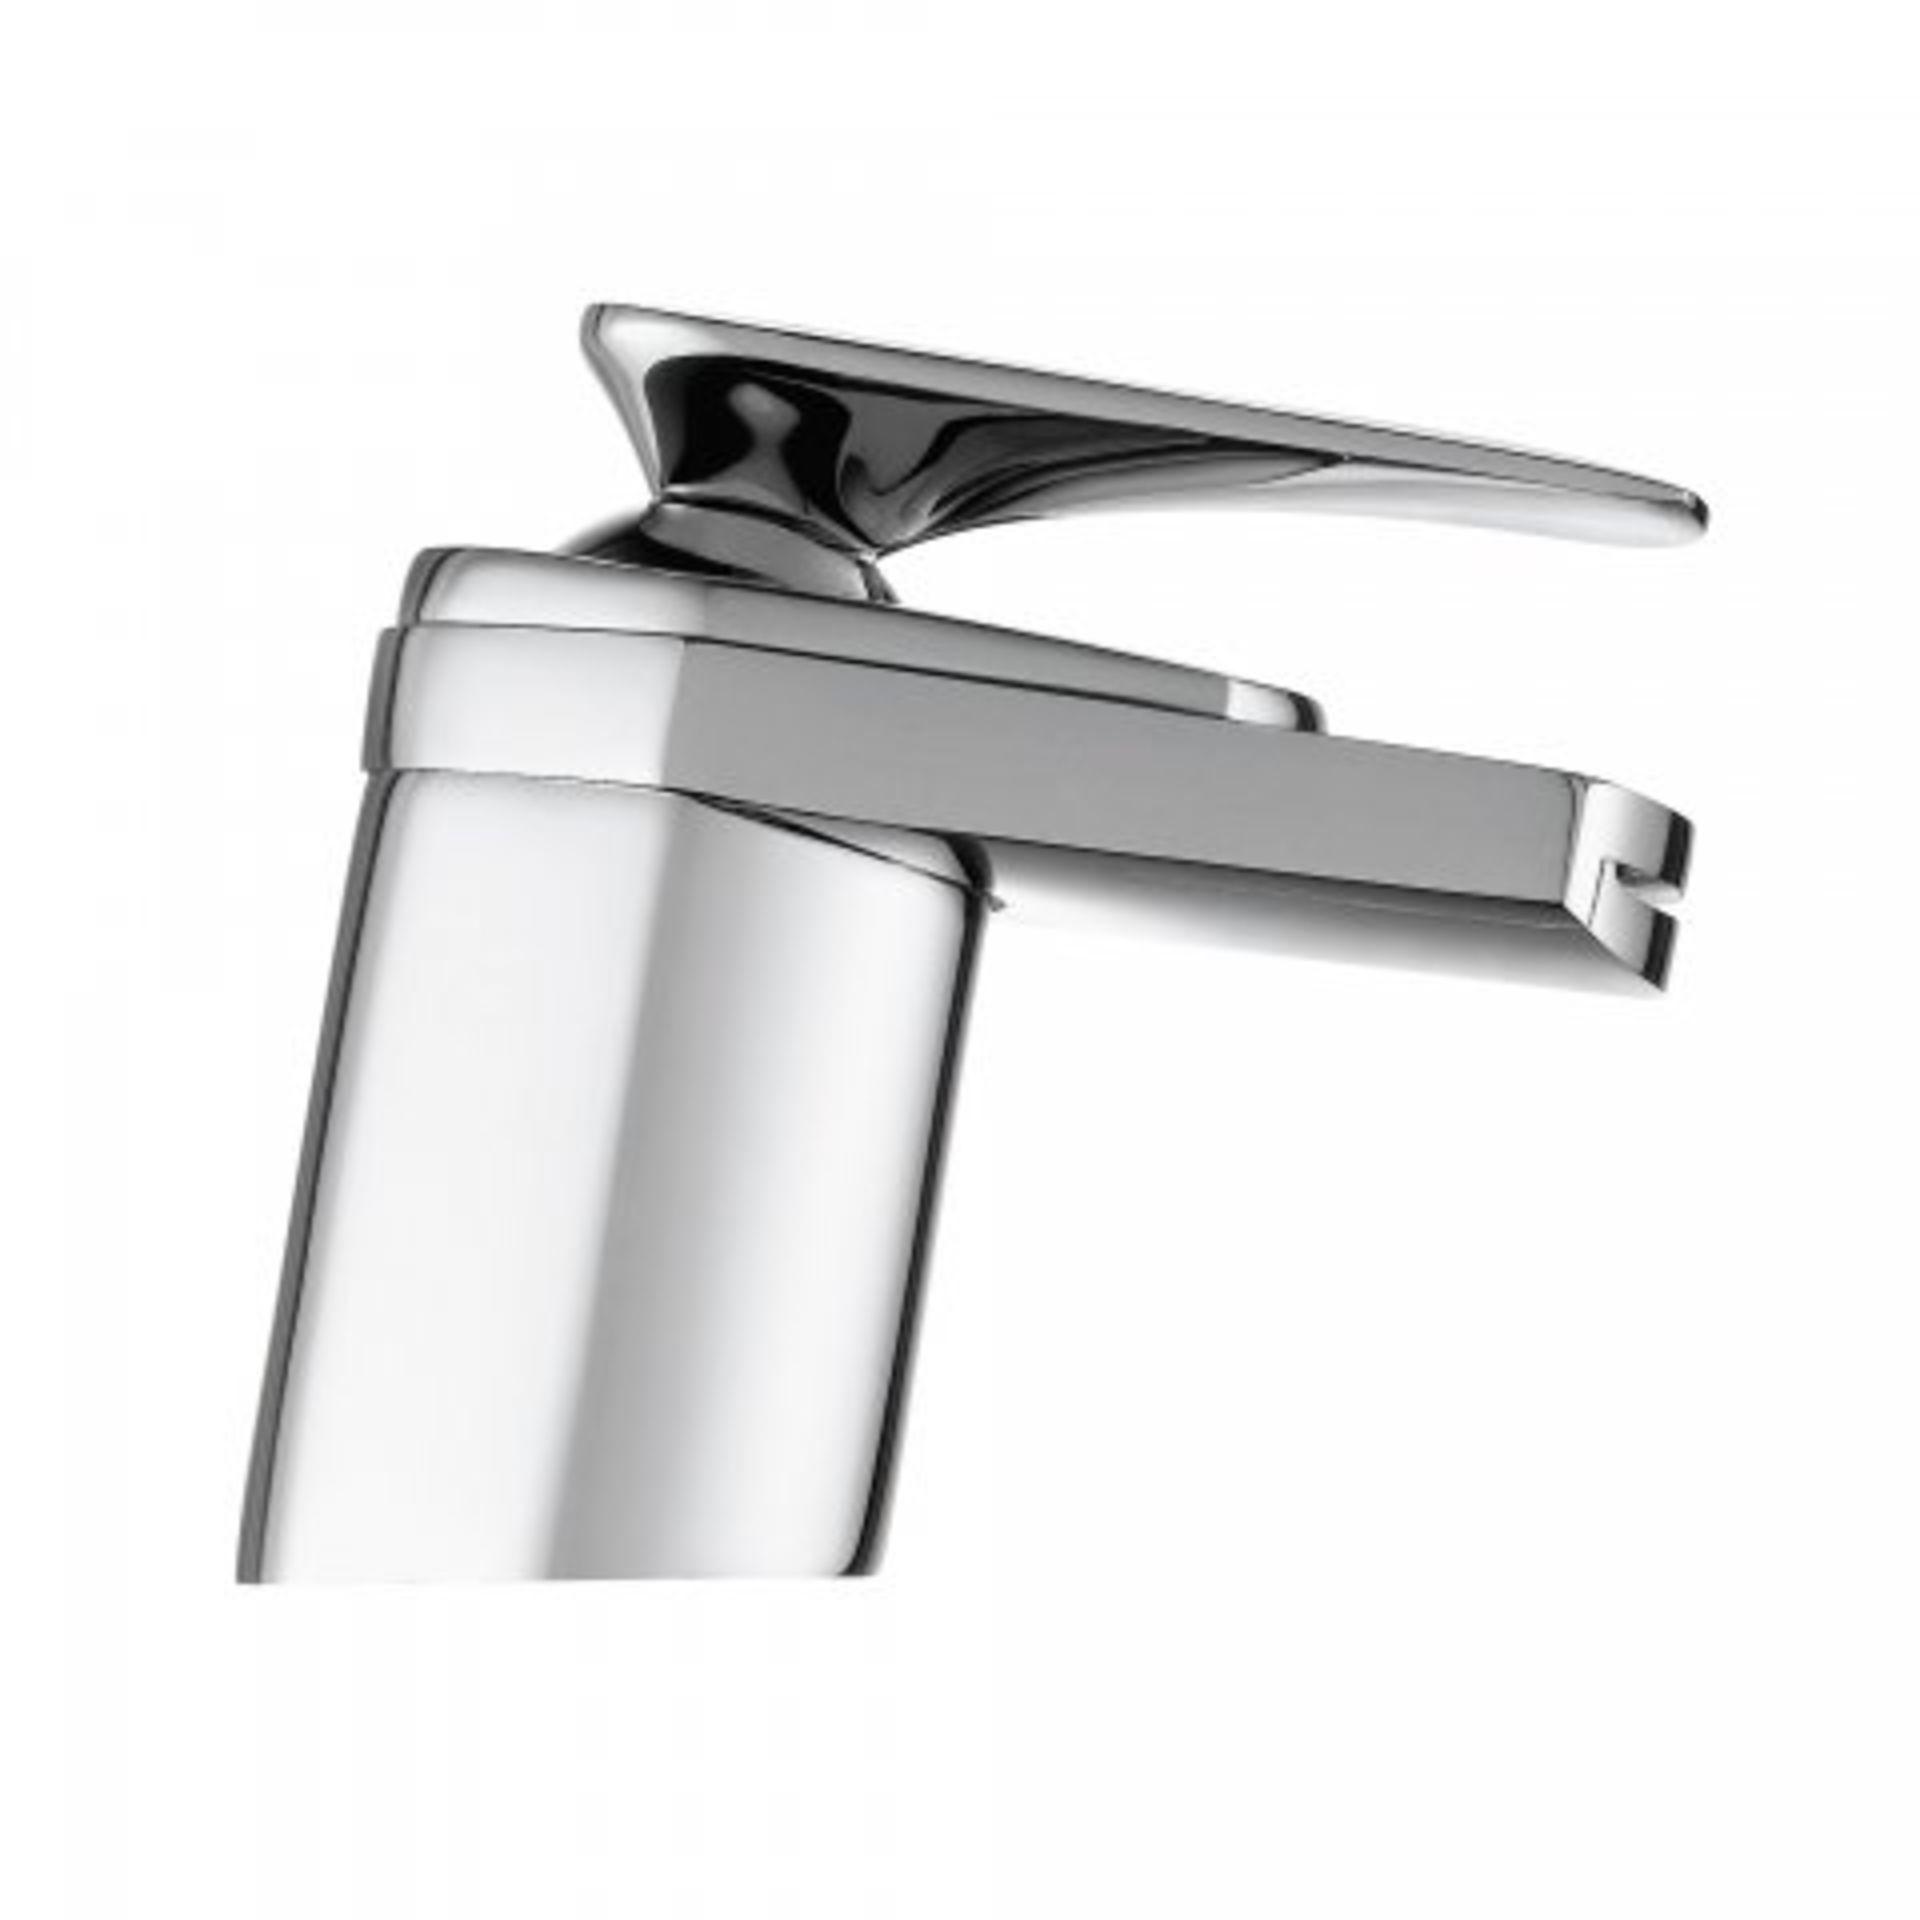 (I99) Oshi Waterfall Basin Mixer Tap Assured Performance Maintenance free technology is incorporated - Image 3 of 5